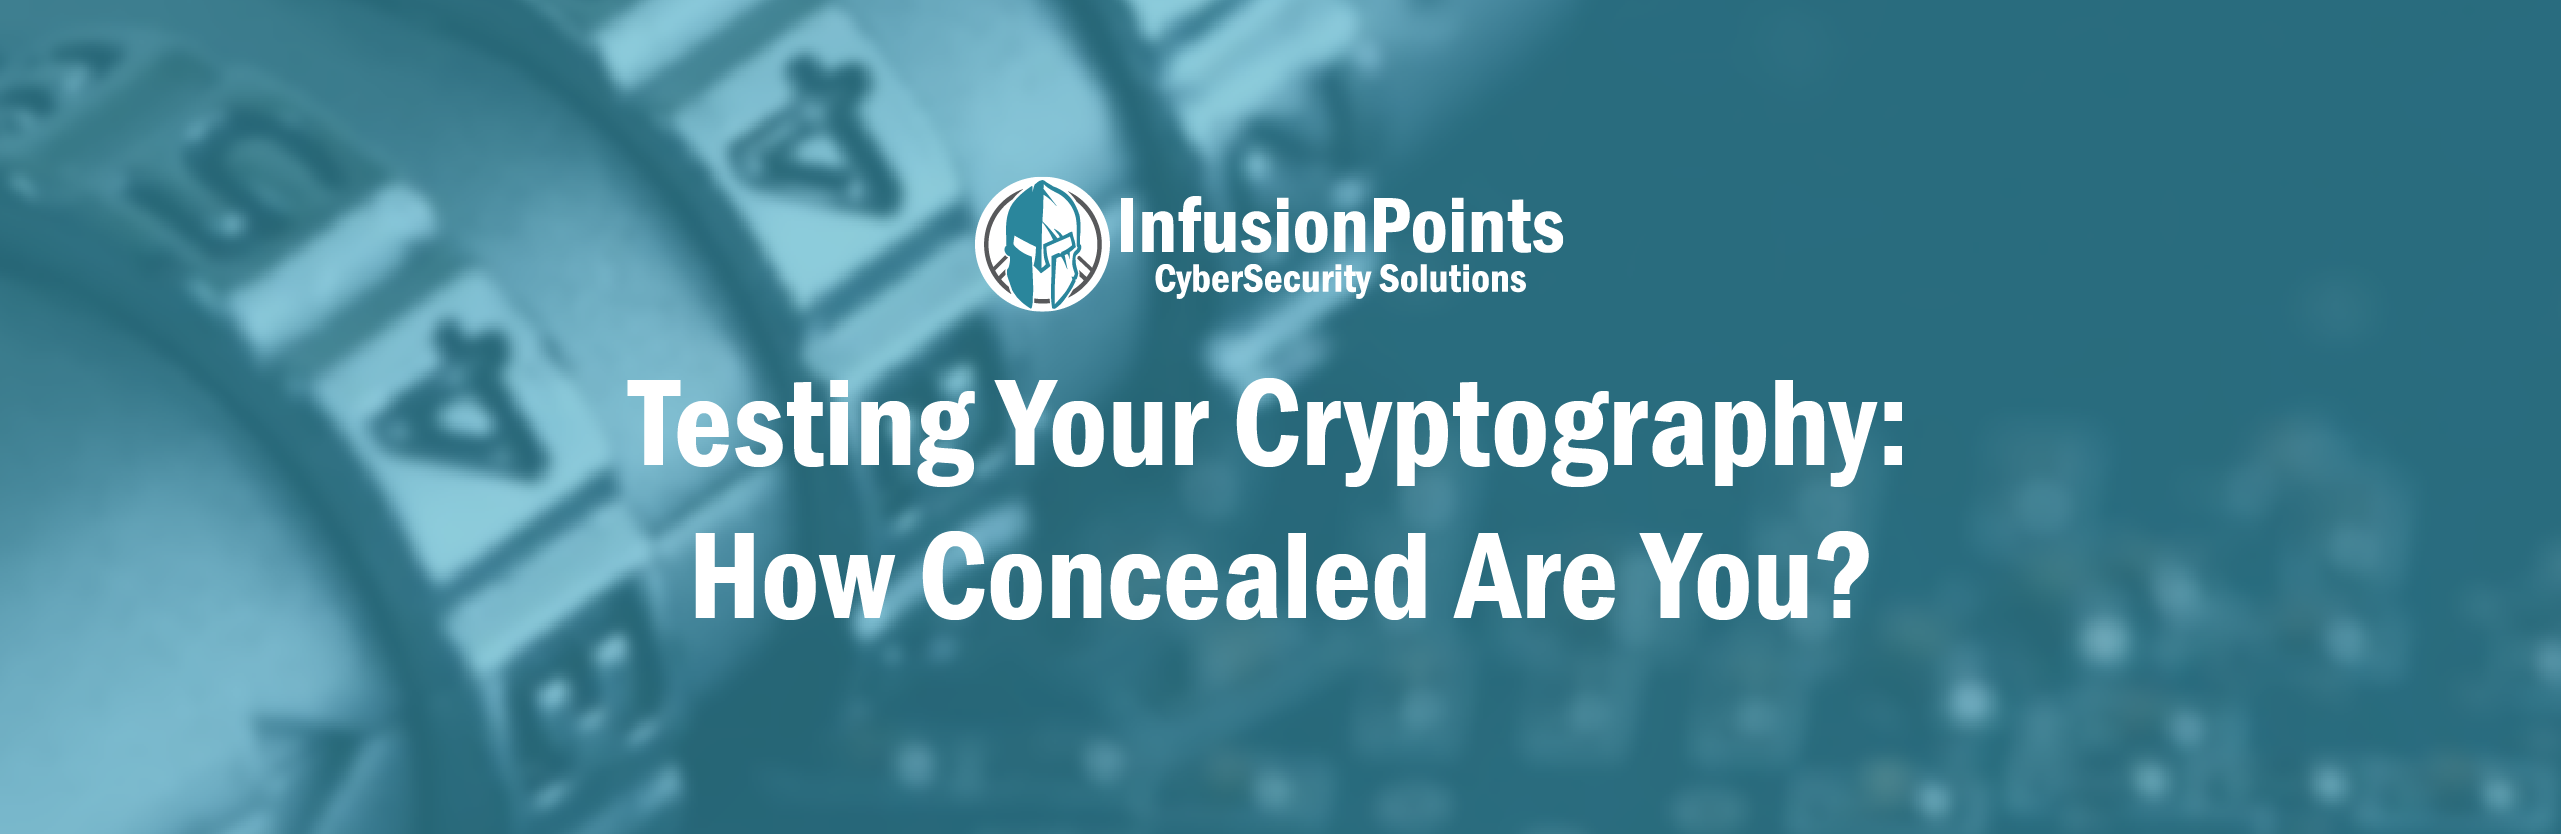 Testing Your Cryptography: How Concealed Are You?